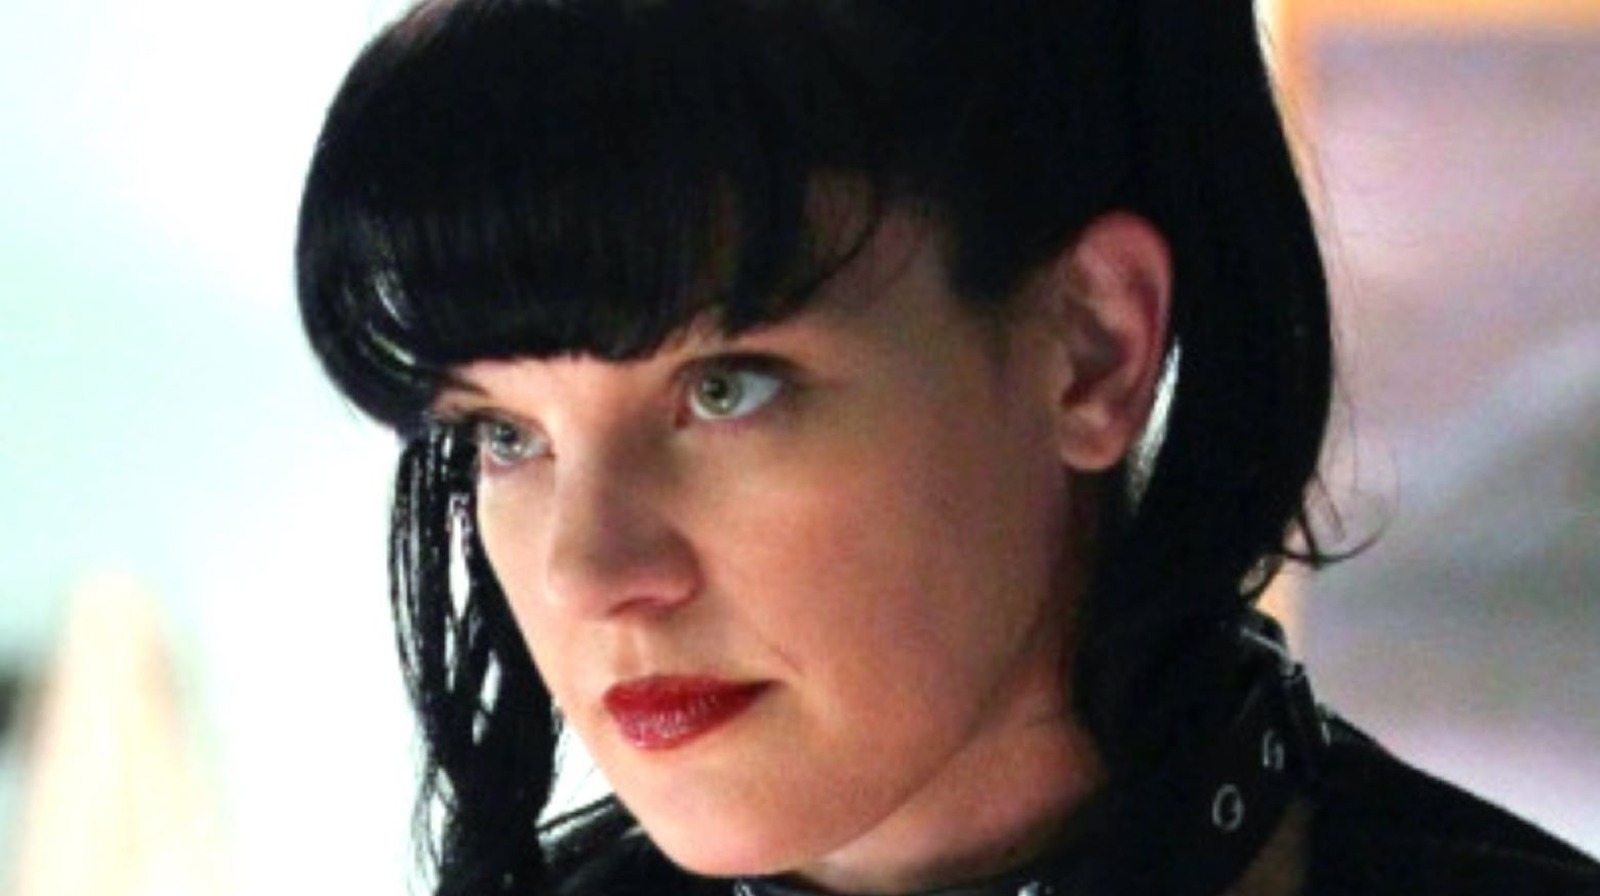 Abby From Ncis Porn Fan Fiction - What Only Hardcore NCIS Fans Know About Abby's Family